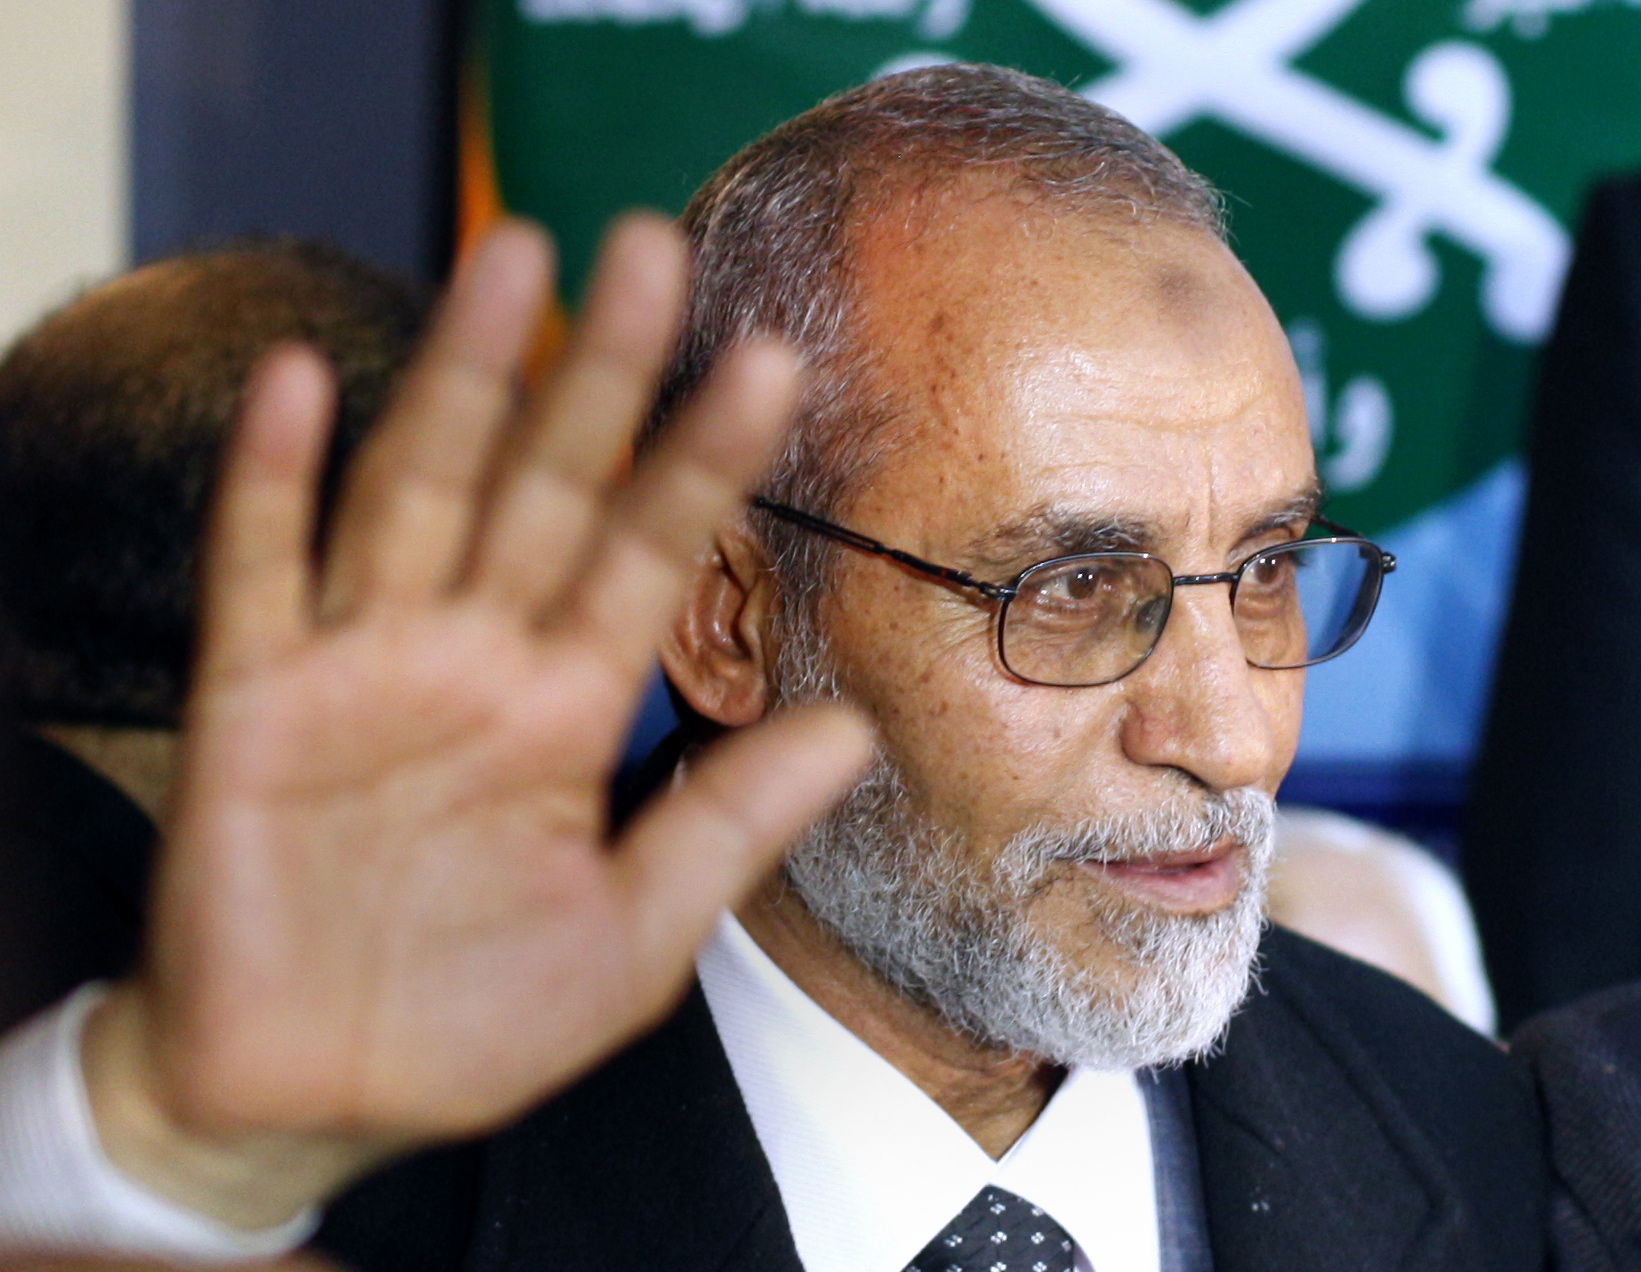 Newly elected leader of Egypt's Muslim Brotherhood Mohammed Badie stands in front of the group's logo during his first press conference in Cairo, Egypt.